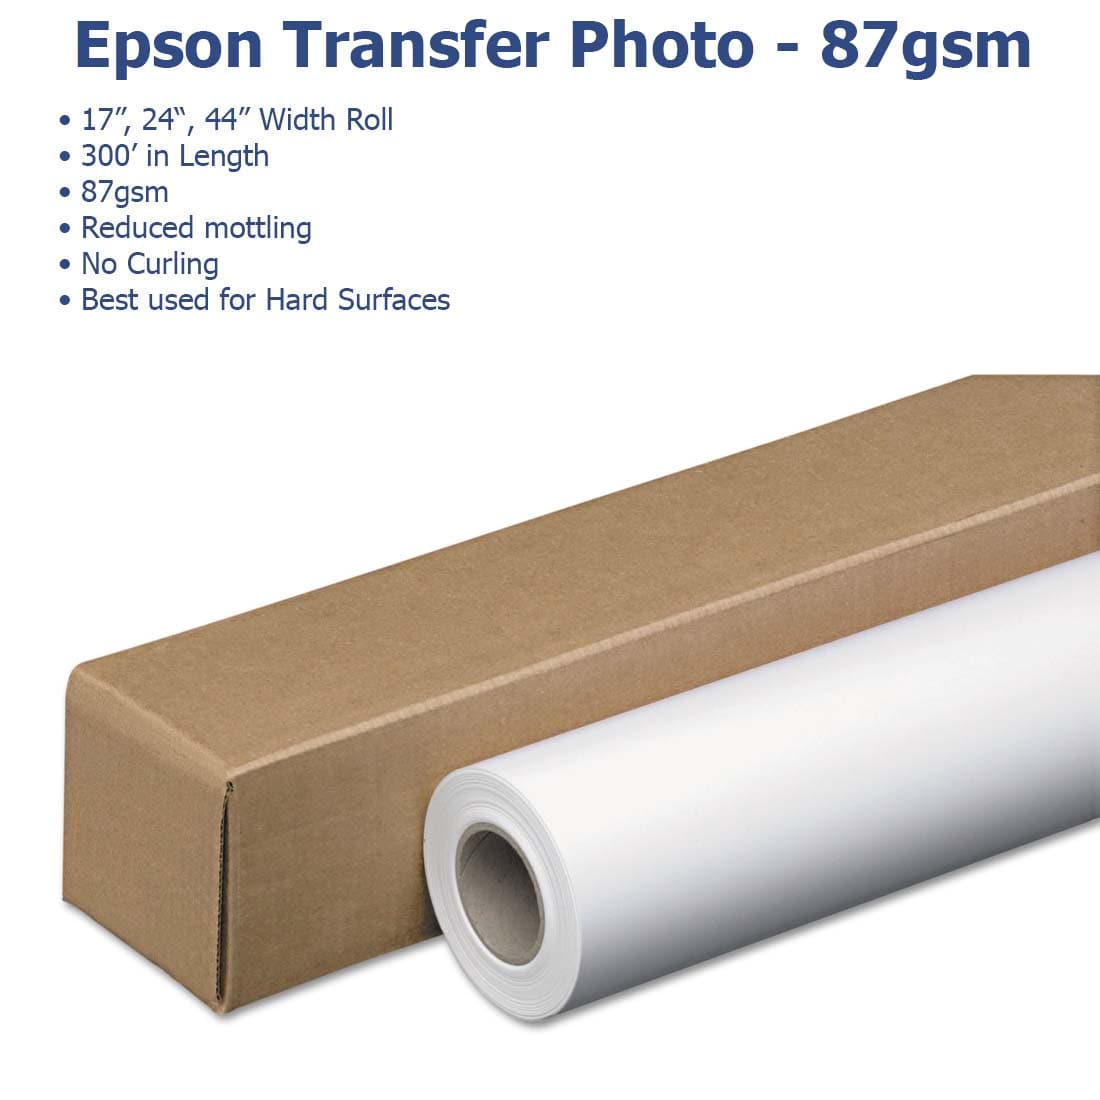 Epson® DS Transfer Photo Roll - Joto Imaging Supplies US